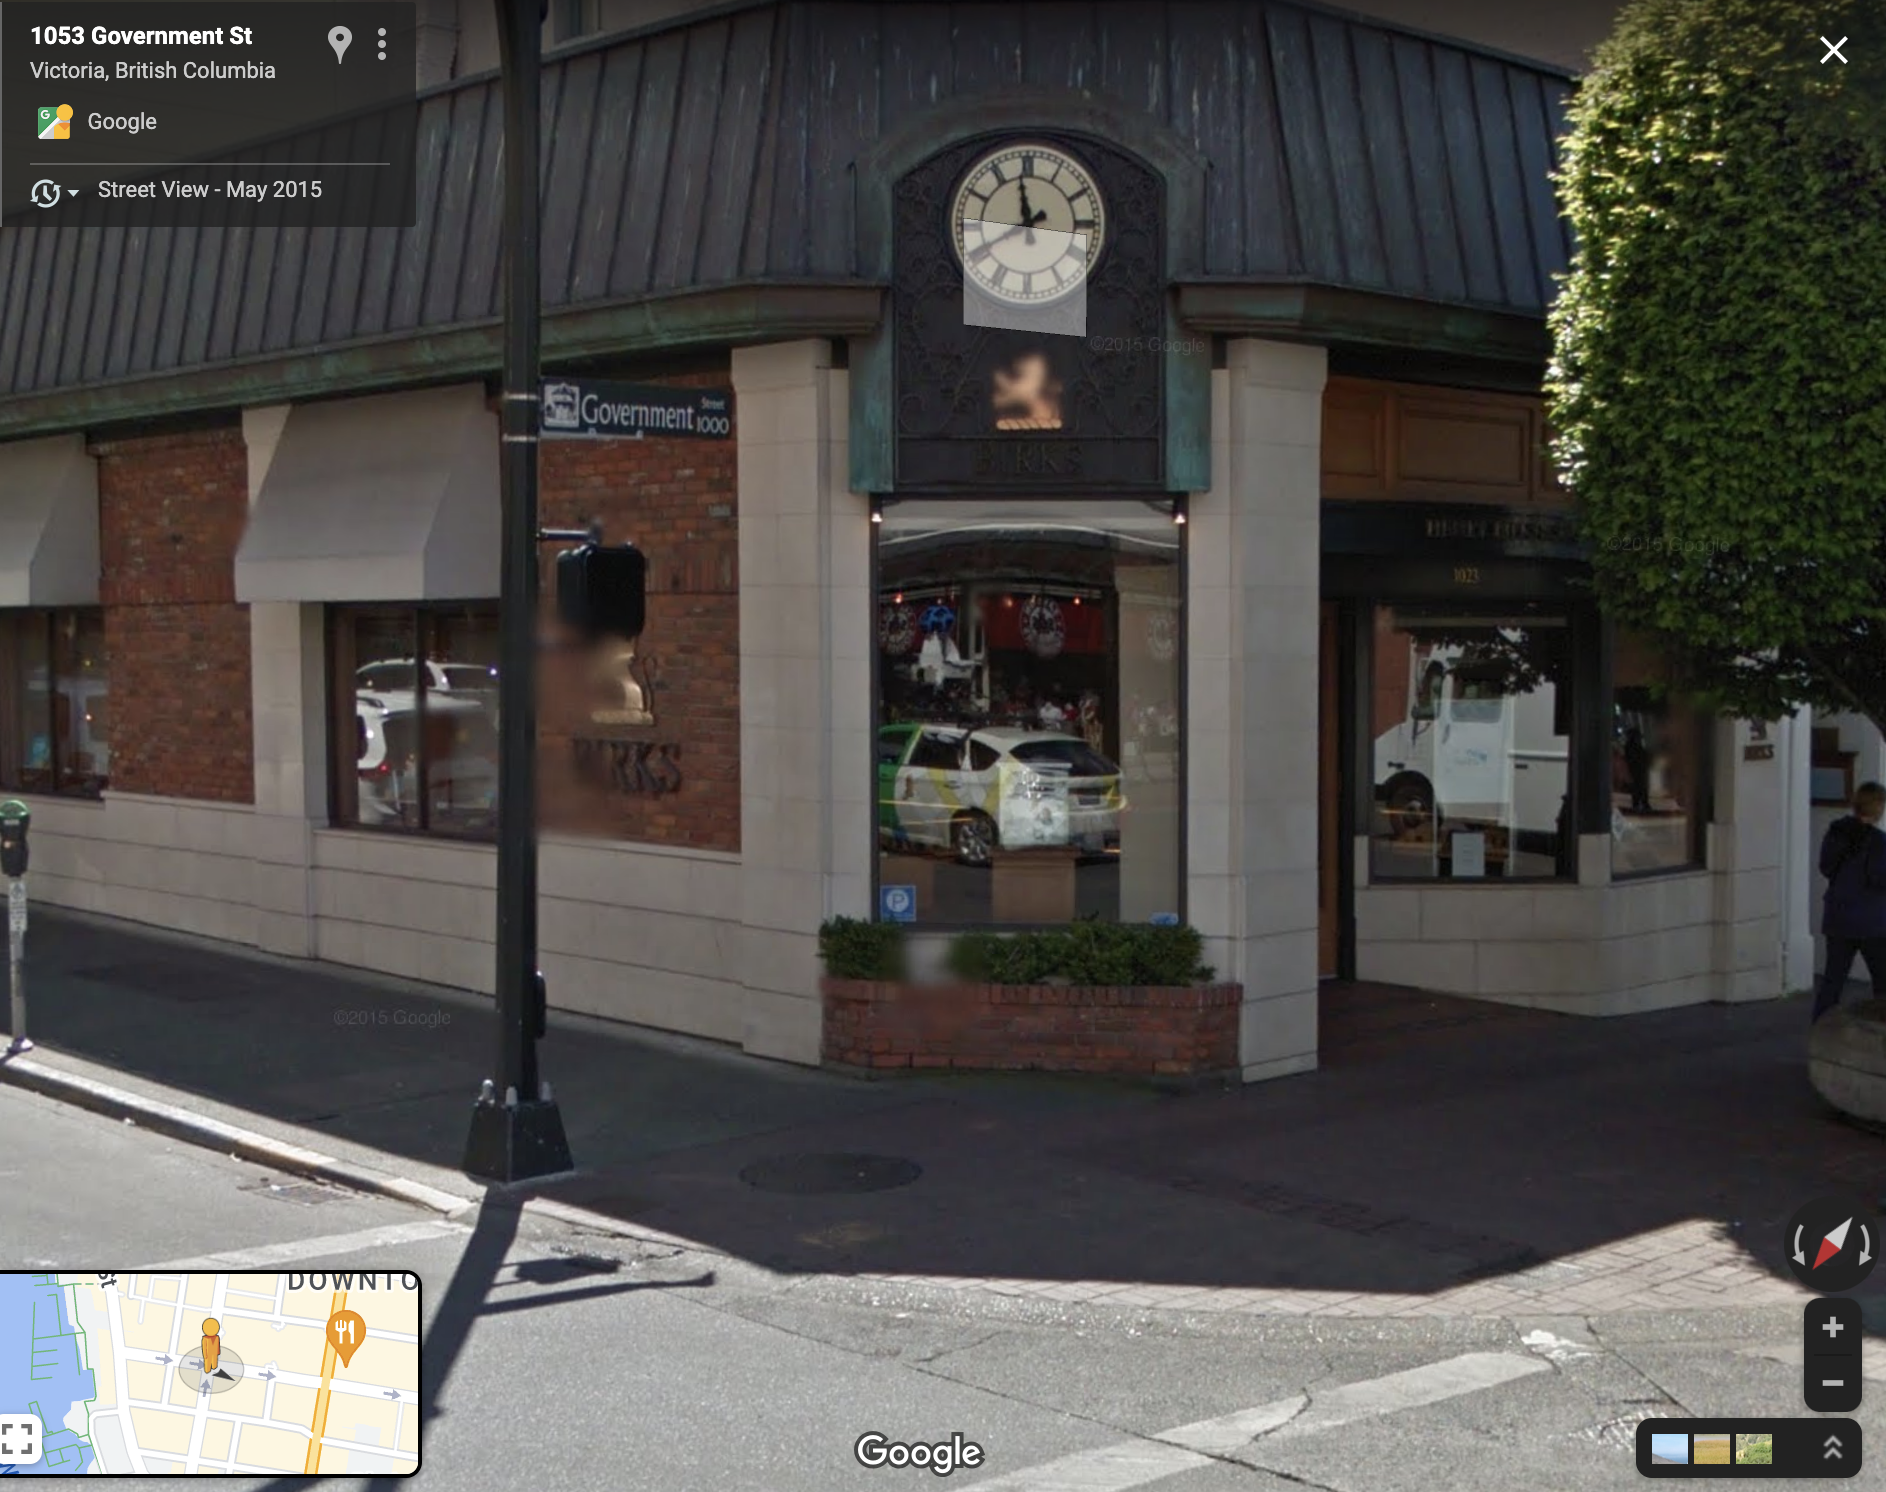  Google Street View shows planter that used to be in front of Birks Jewelry. 